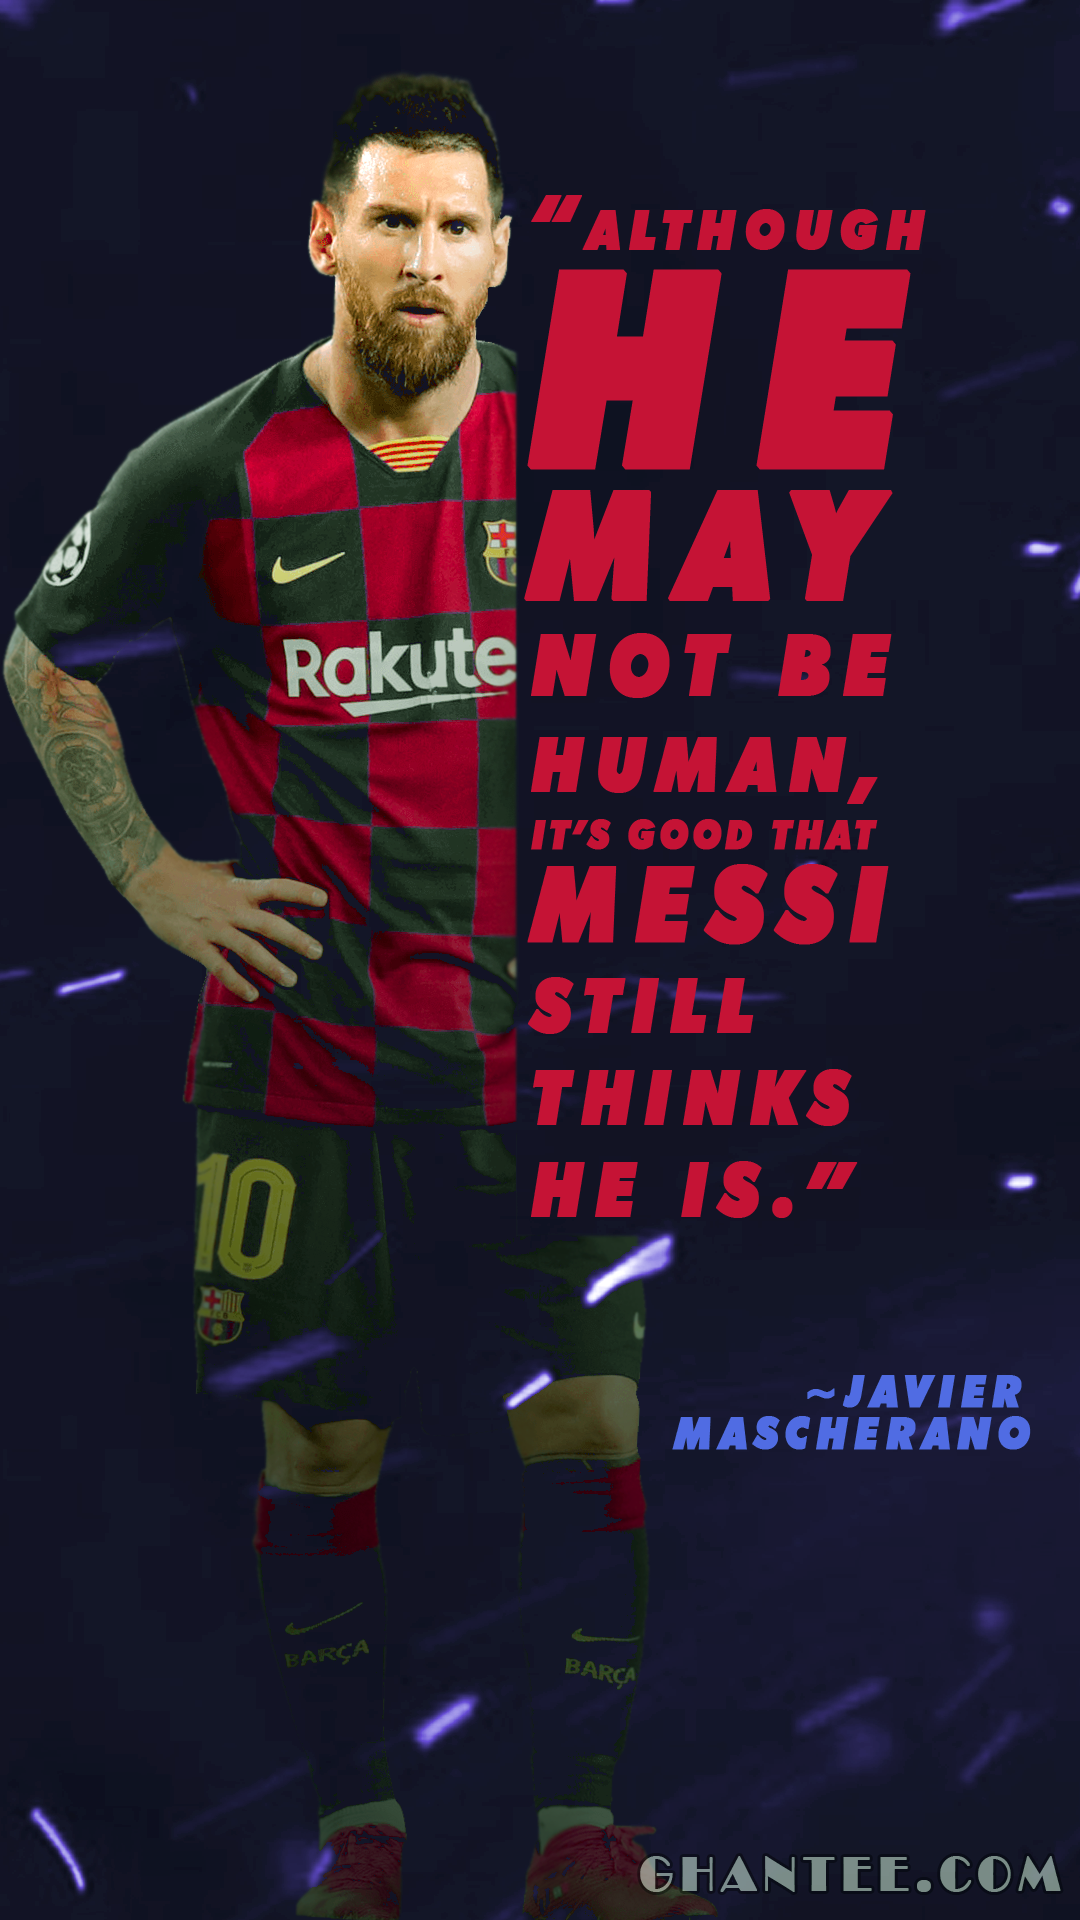 lionel messi quotes full HD wallpaper for phone